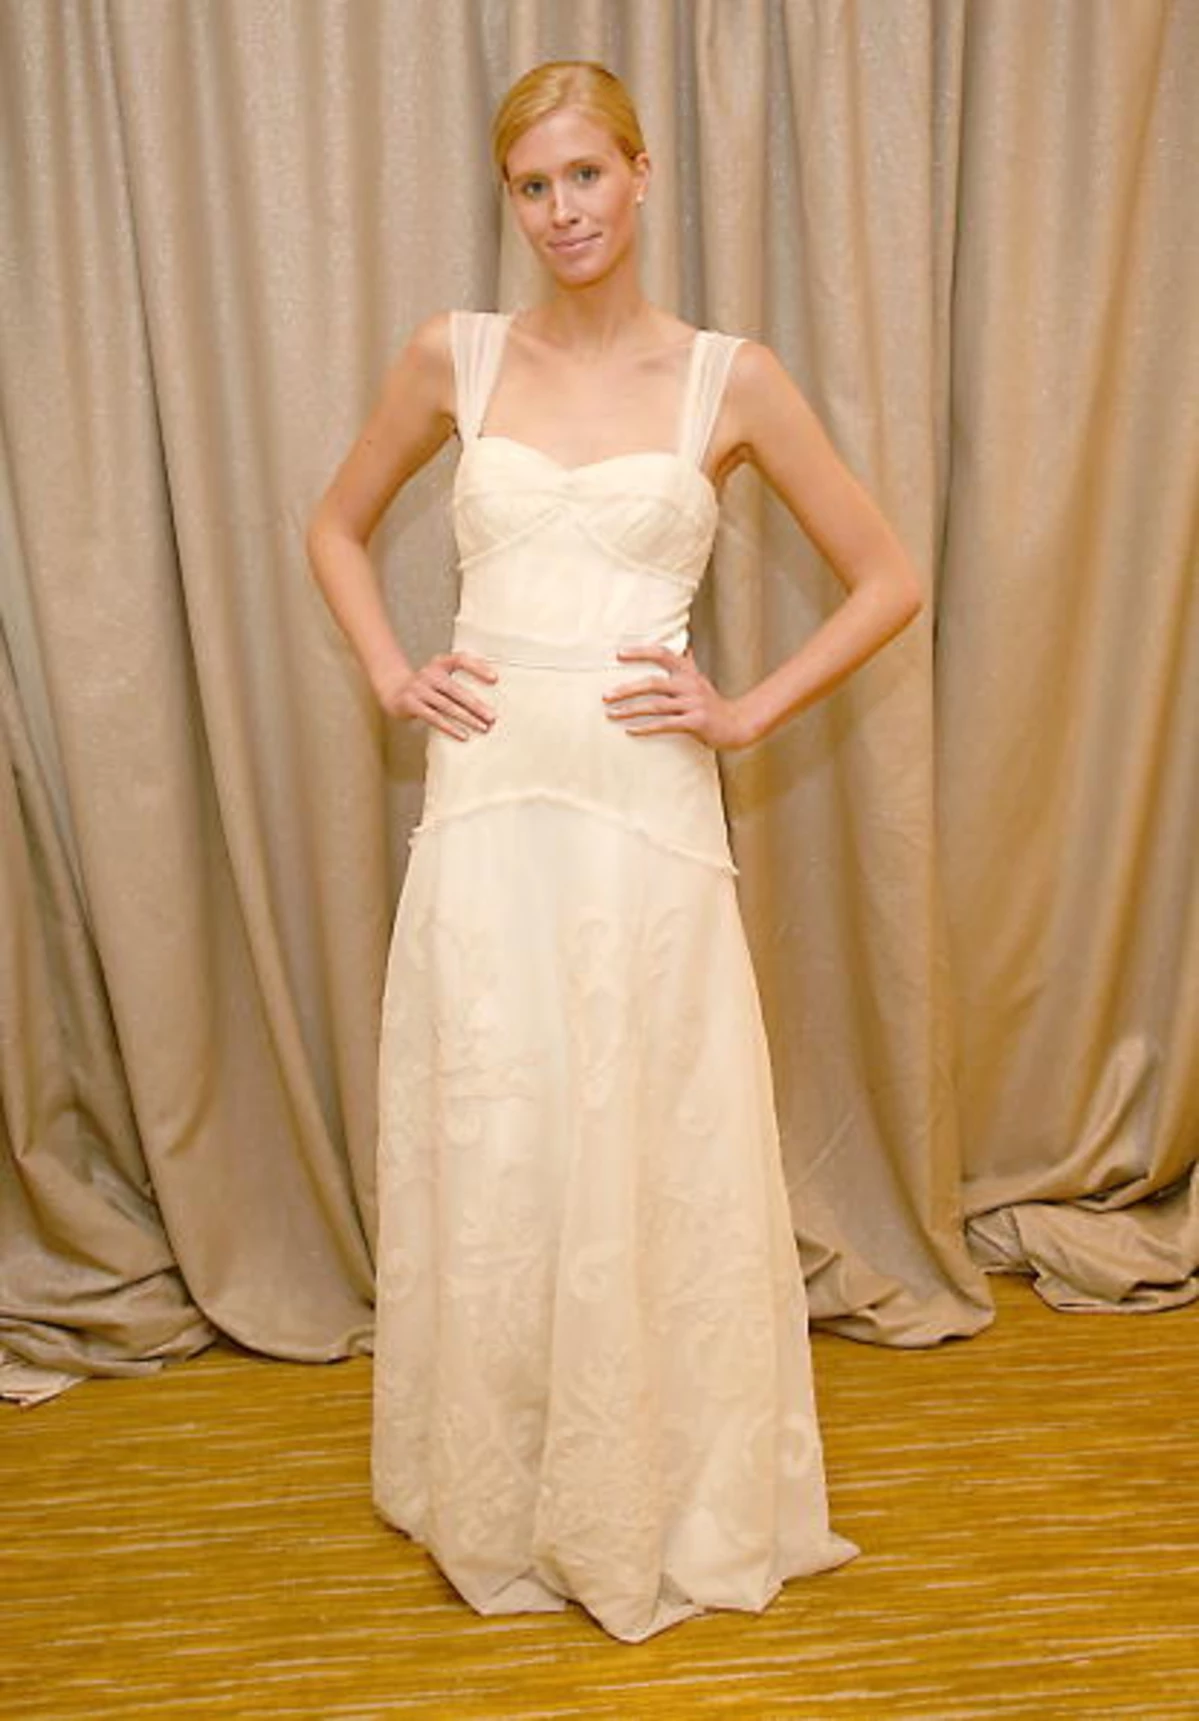 Top Costco Wedding Dresses in the world Learn more here 